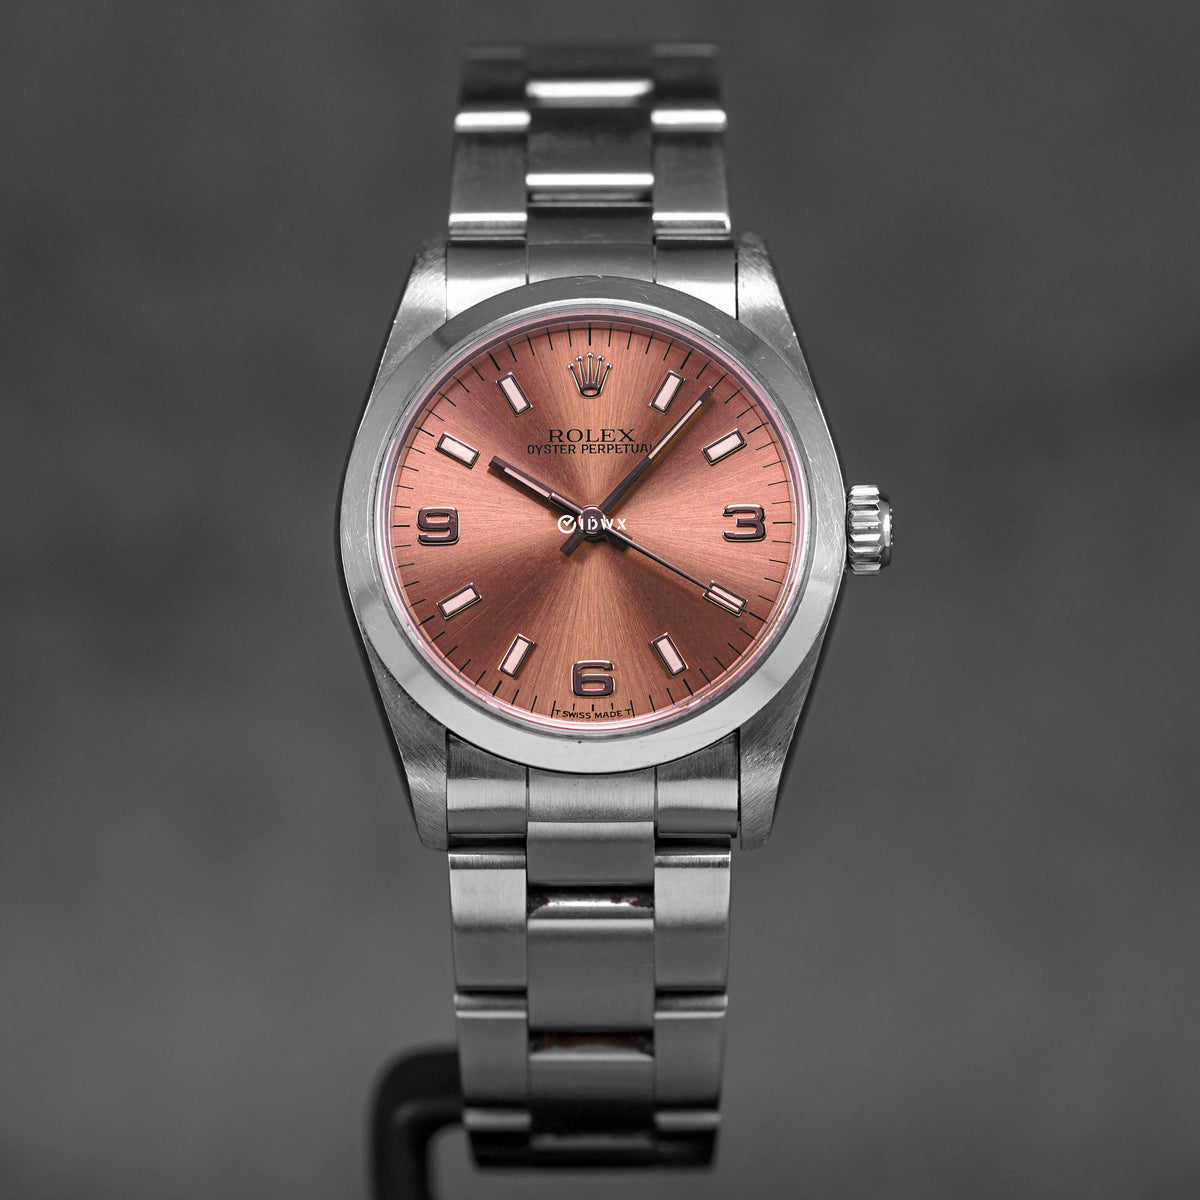 Oyster Perpetual 67480